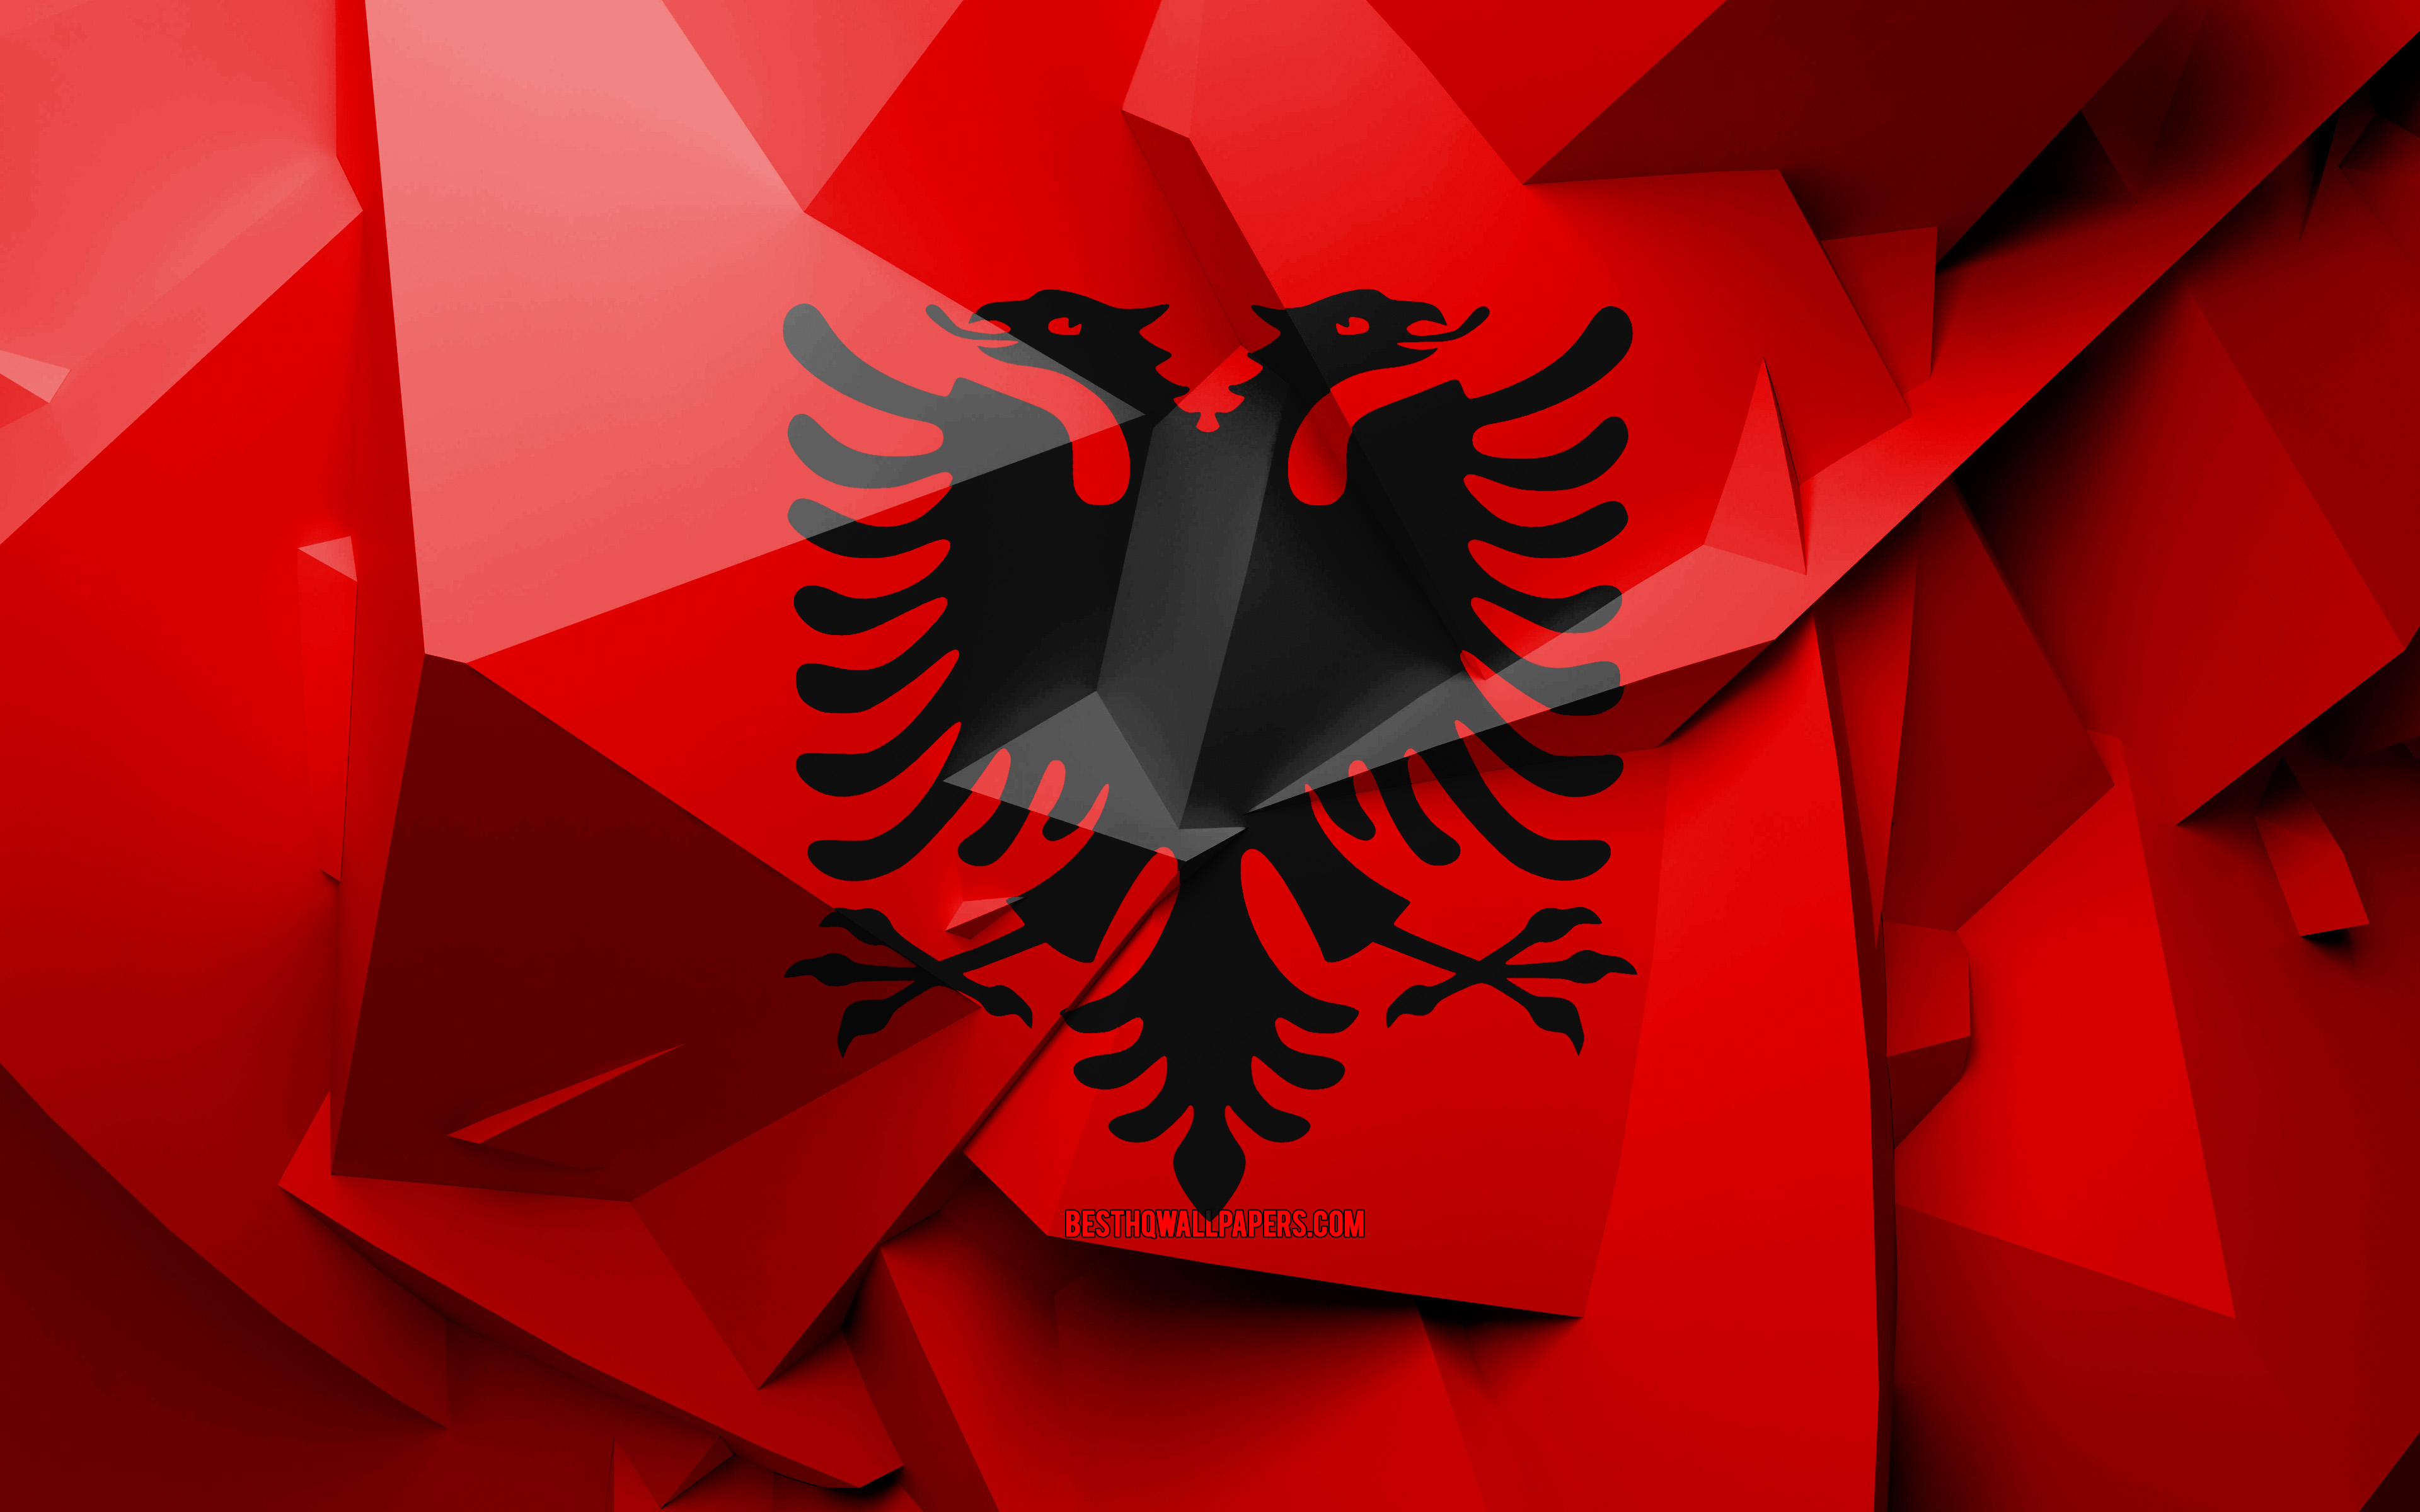 Download wallpaper 4k, Flag of Albania, geometric art, European countries, Albanian flag, creative, Albania, Europe, Albania 3D flag, national symbols for desktop with resolution 3840x2400. High Quality HD picture wallpaper